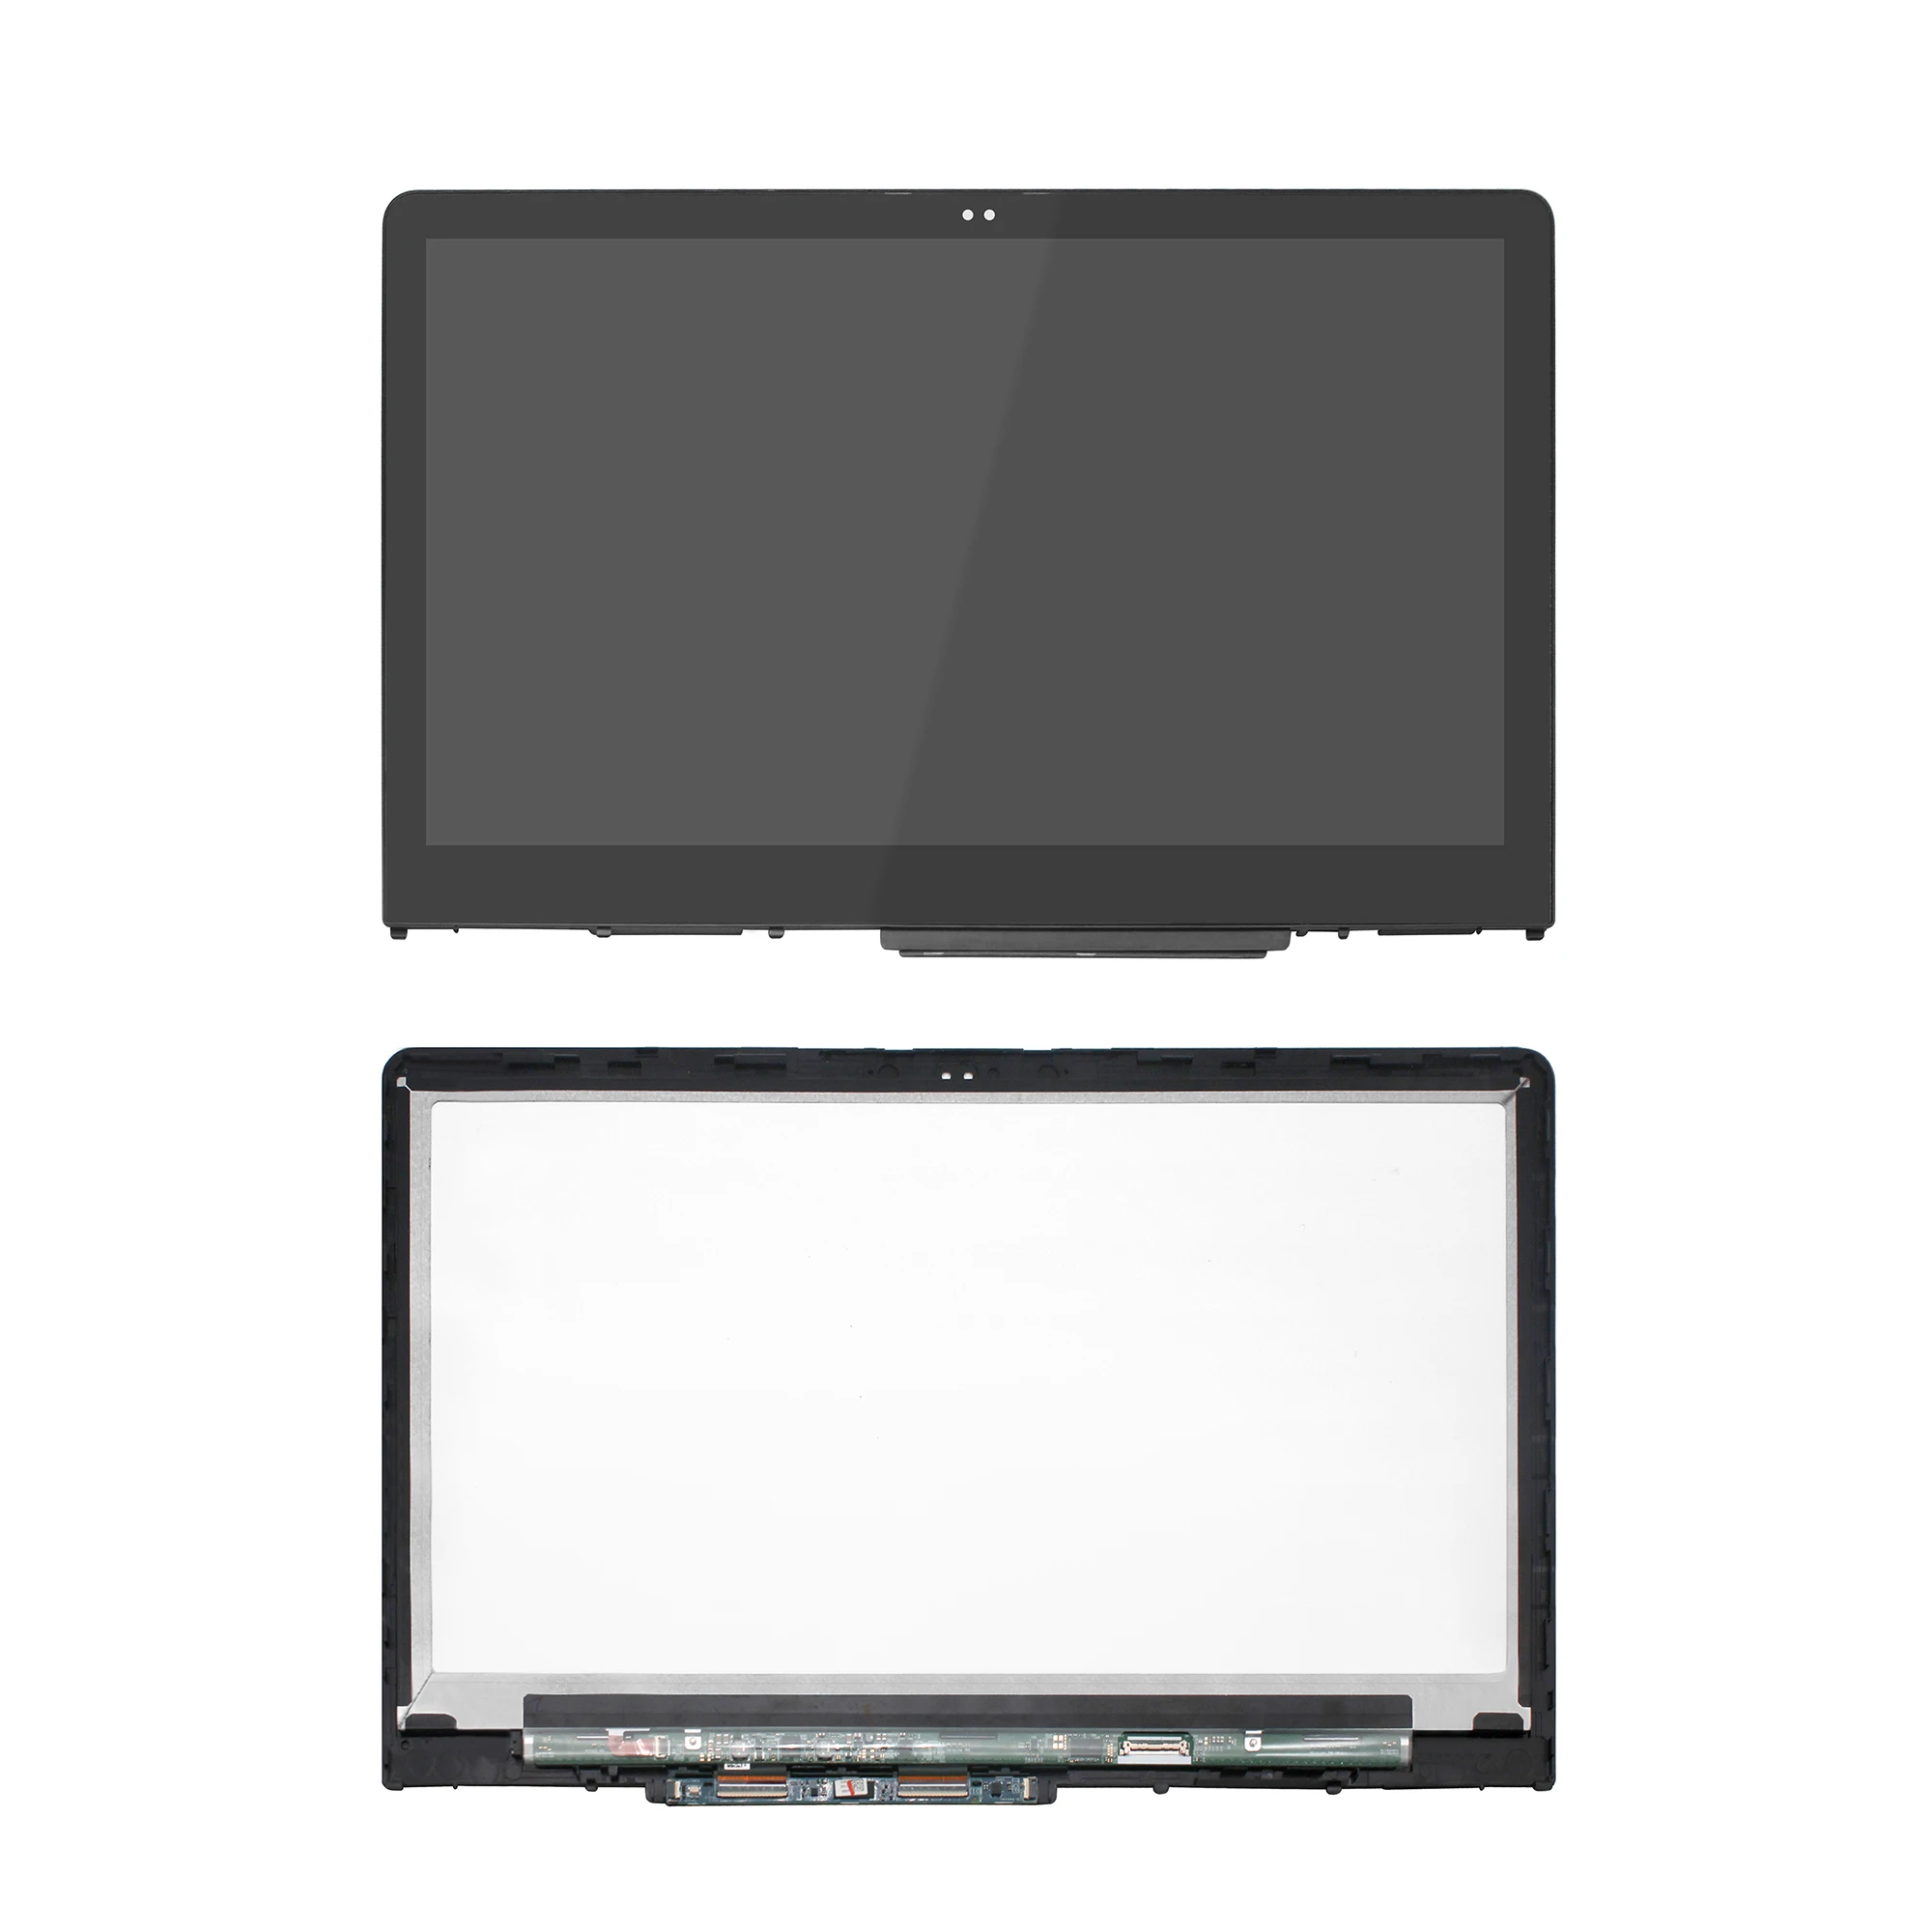 FHD IPS LCD Touch Screen Digitizer for HP Pavilion x360 15 br052od 924531 001